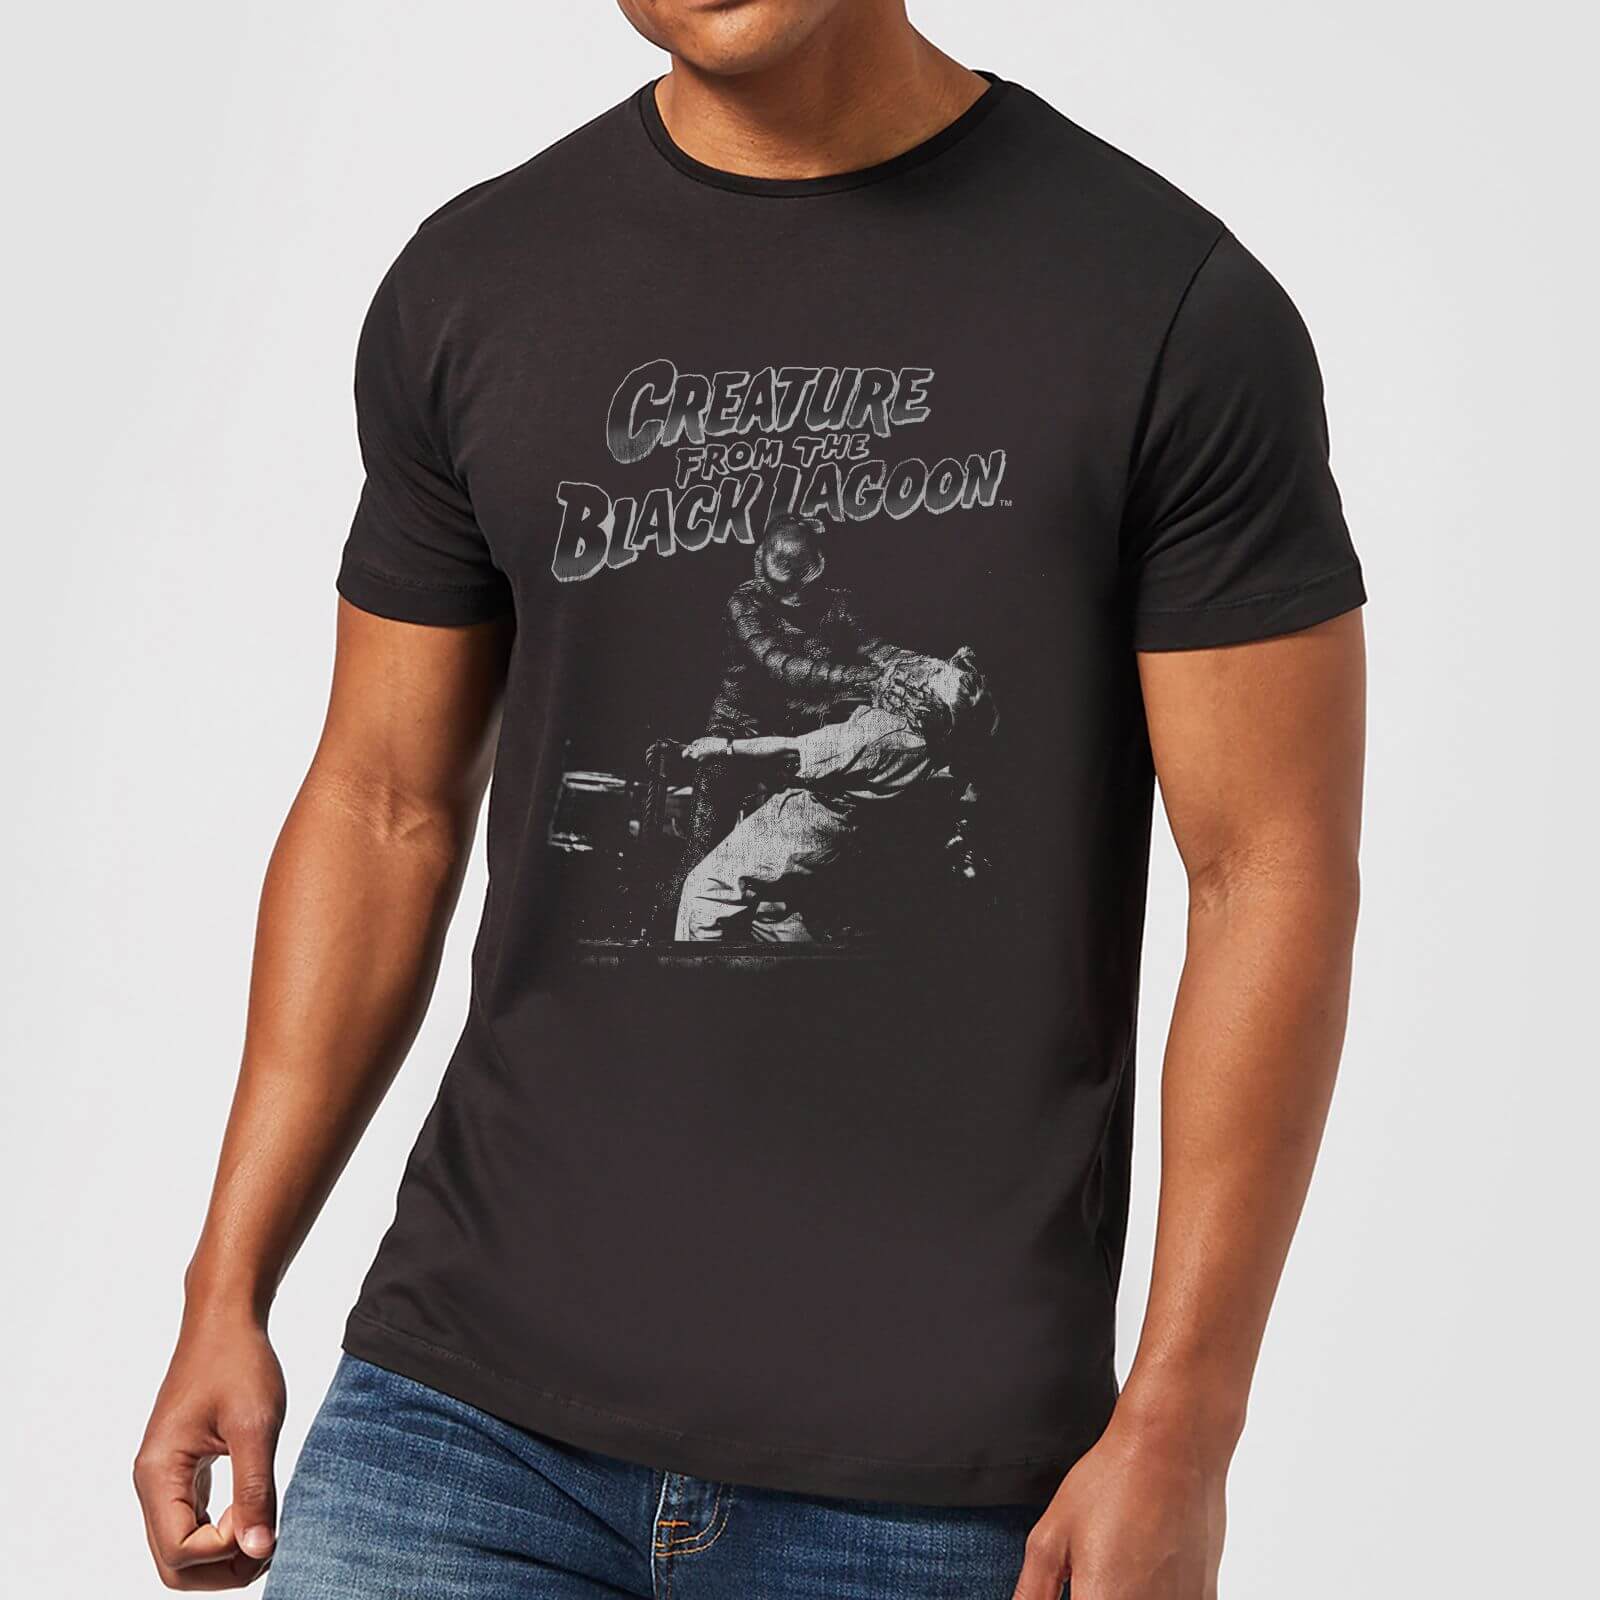 Universal Monsters Creature From The Black Lagoon Black and White Men's T-Shirt - Black - XS